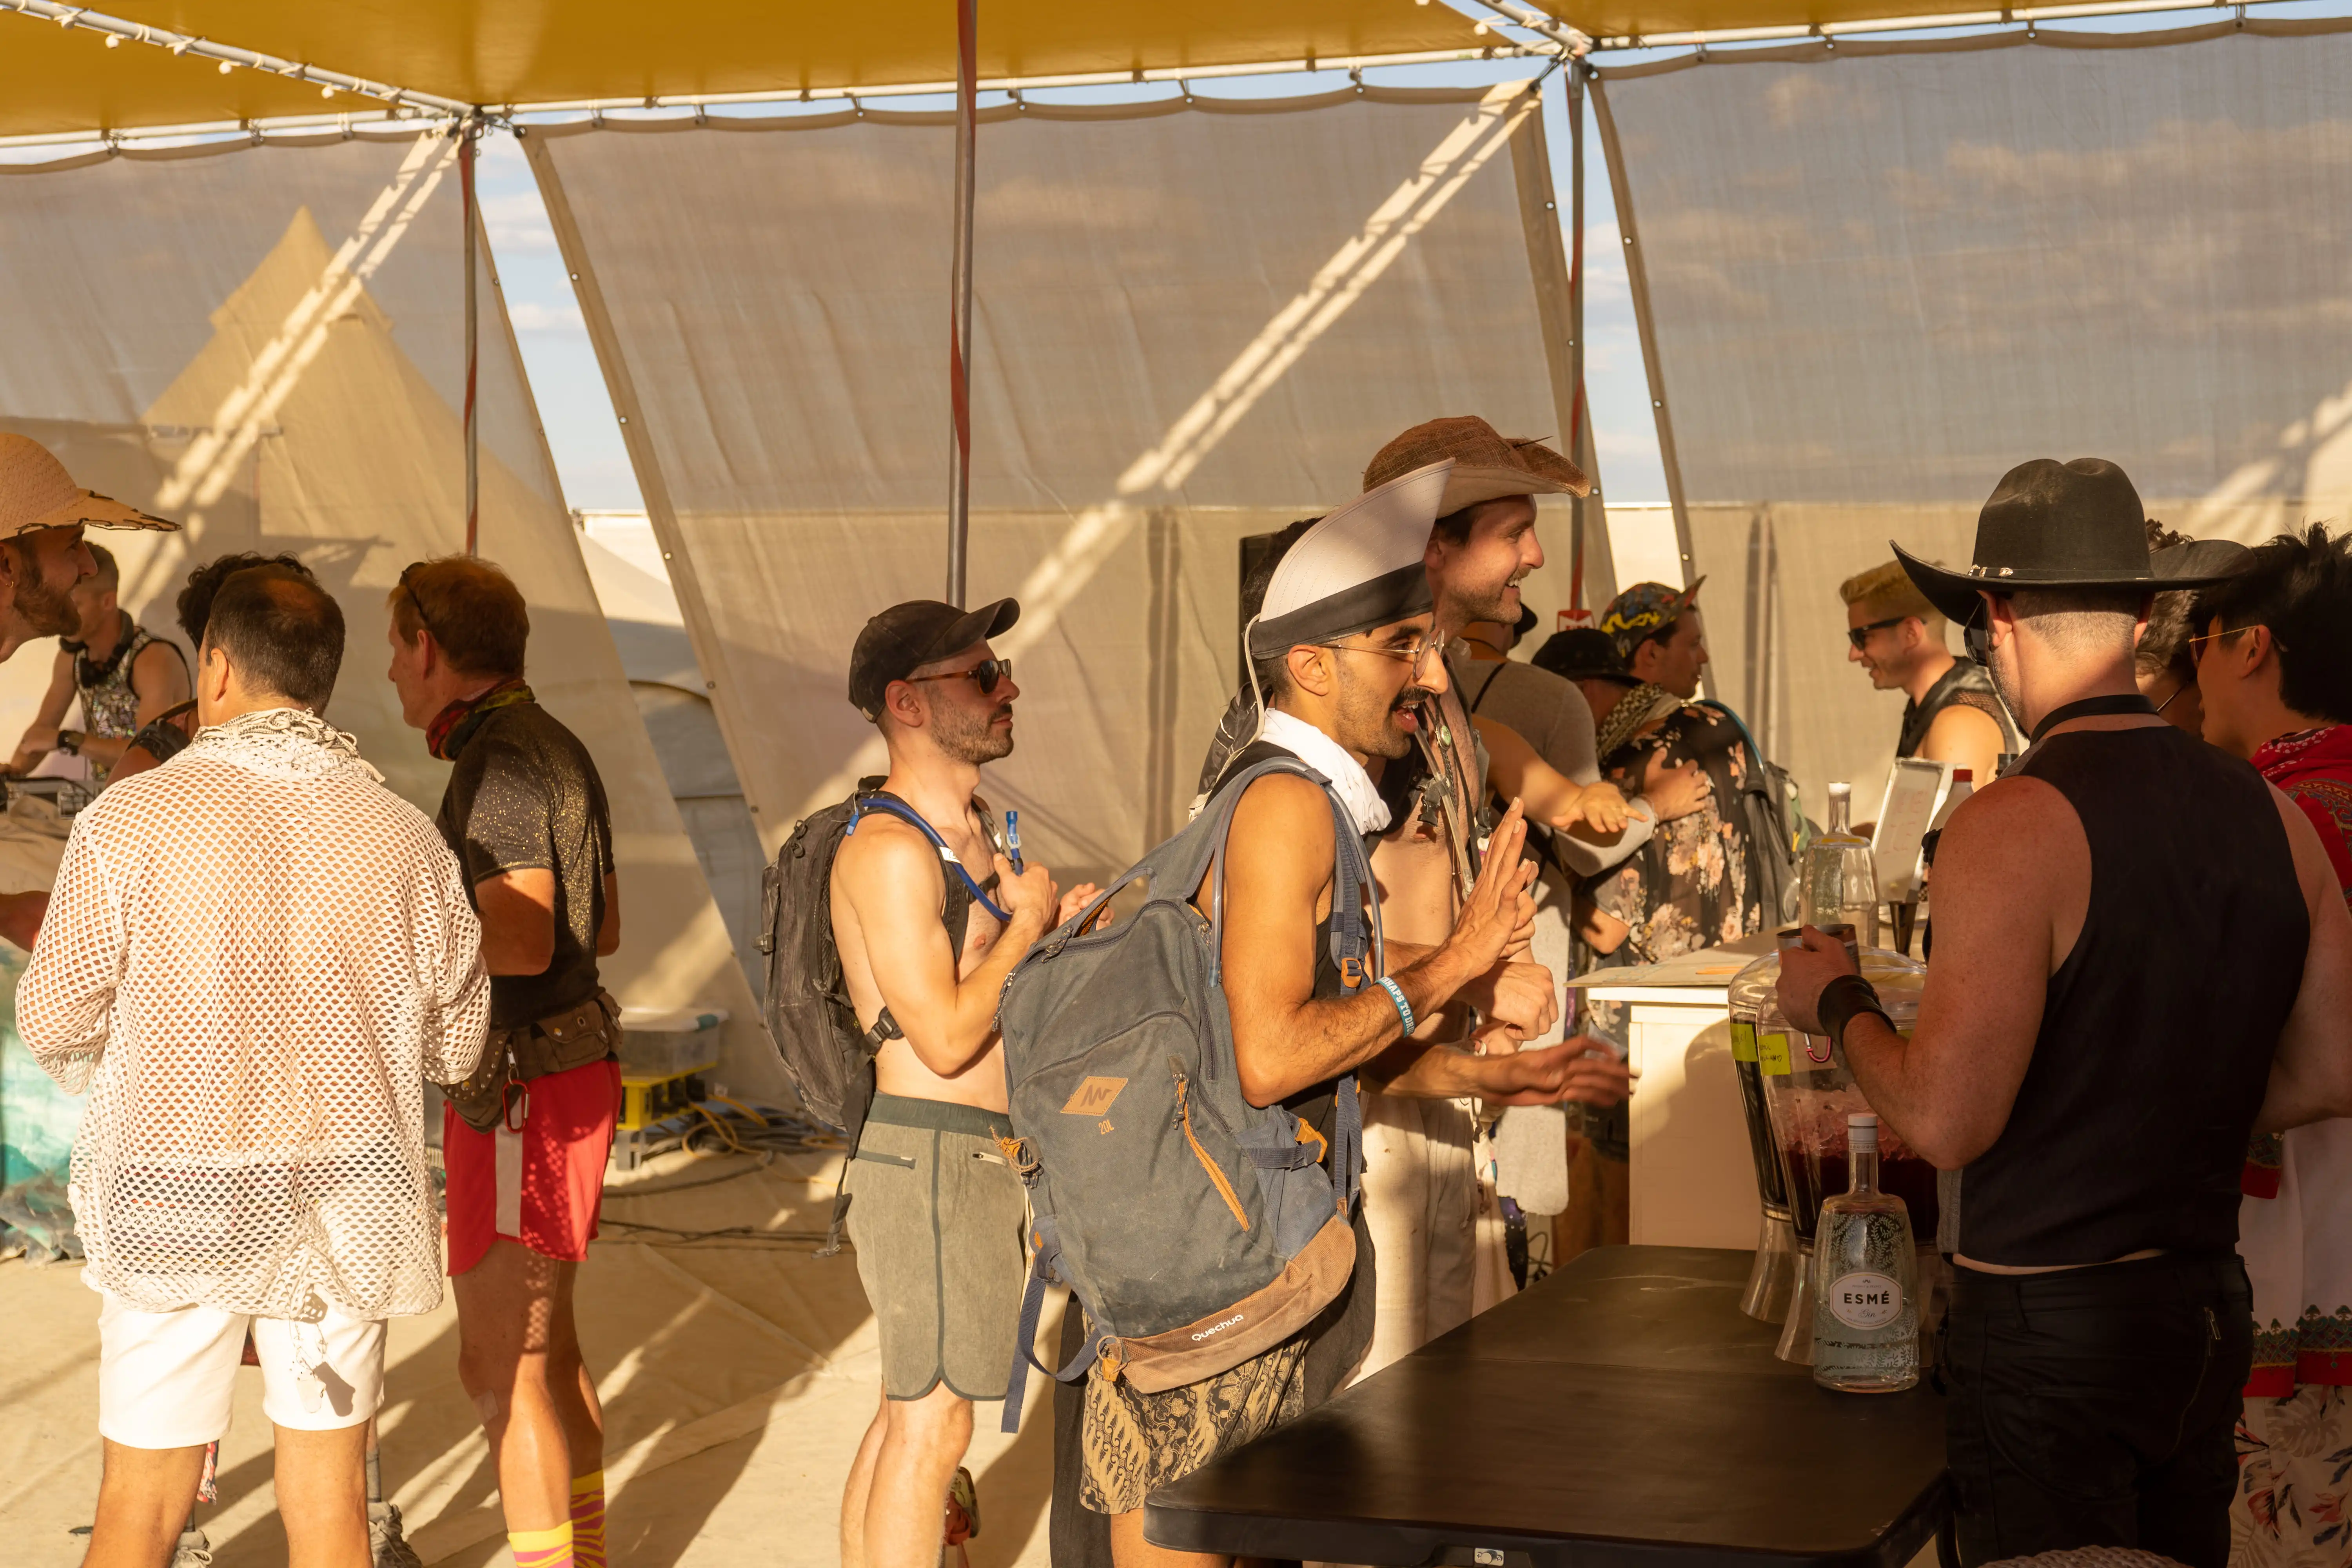 Sunset. The bar at the Future Turtles theme camp. Inside the shade structure, with tarps above and sloped walls made of white mesh to deflect wind. A DJ plays while several smiling Burners stand around at an informal, dusty bar. Bartenders are preparing drinks.